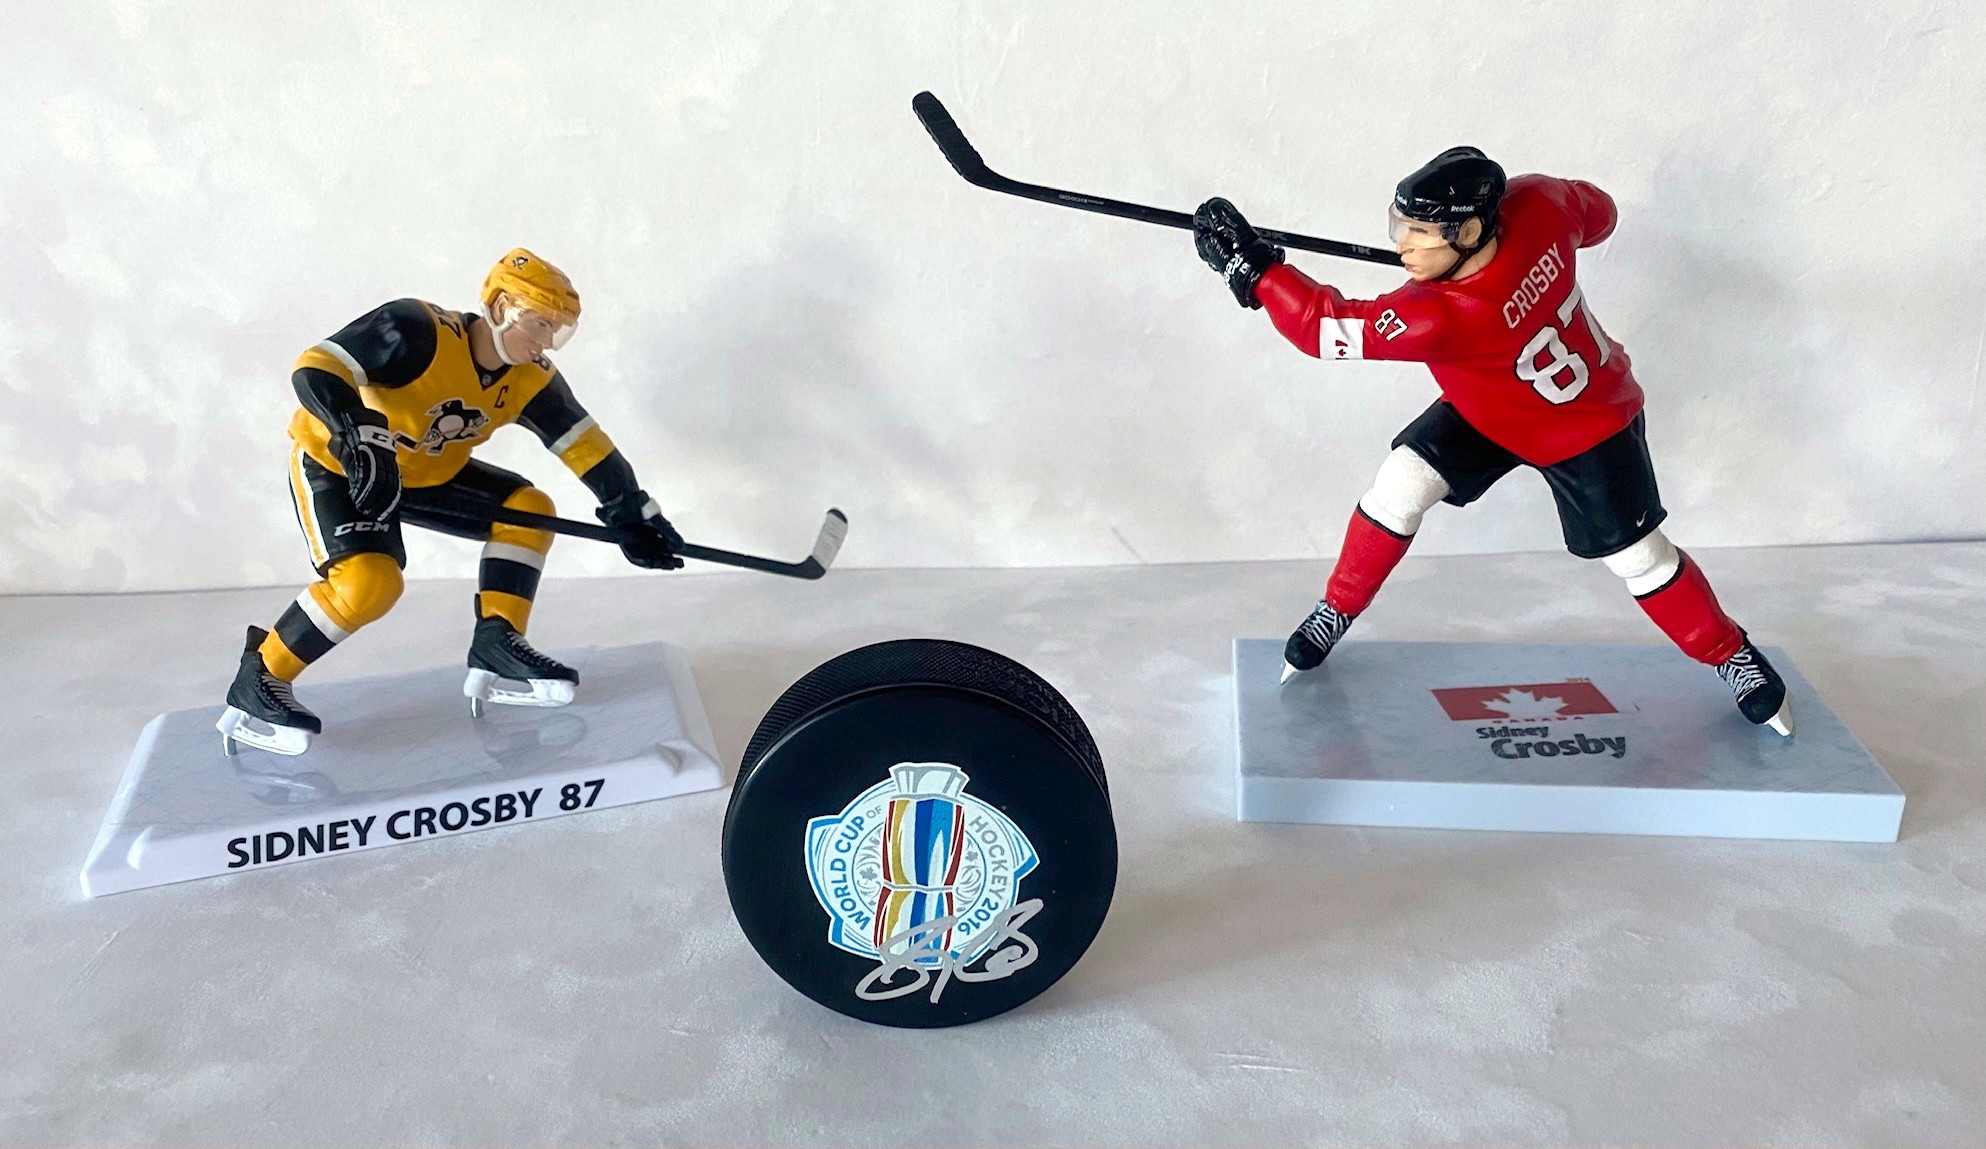 Sidney Crosby Signed World Cup of Hockey Puck + 2 Figurines - Beckett